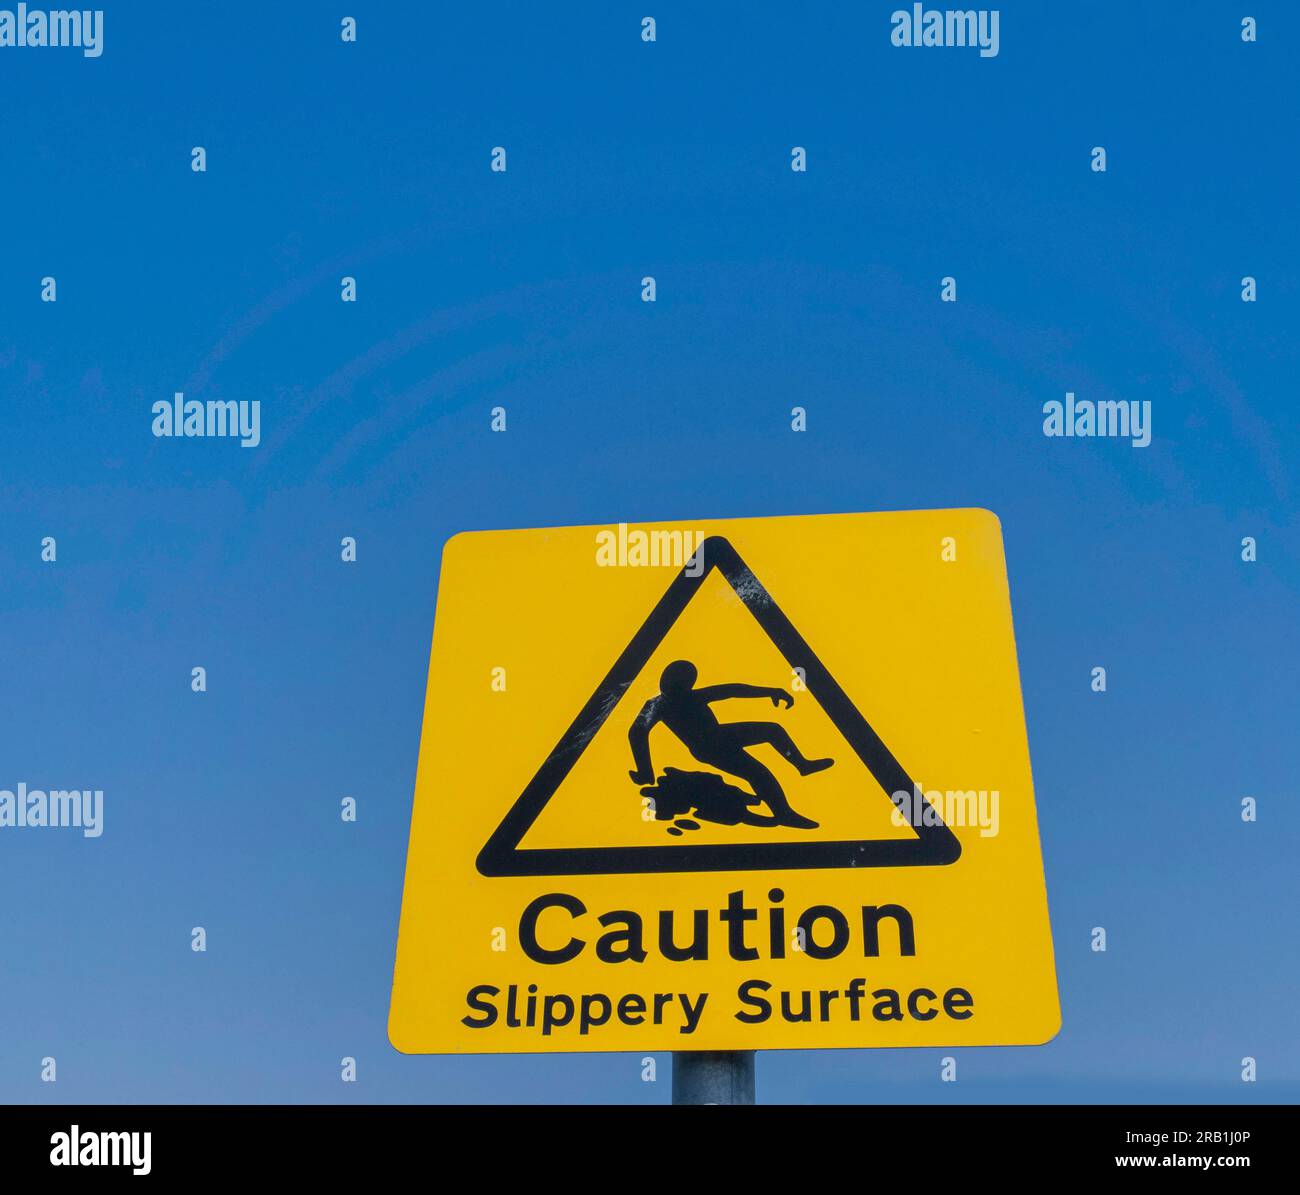 Signage for a slippery surface, a yellow sign set agains a clear blue sky. Stock Photo